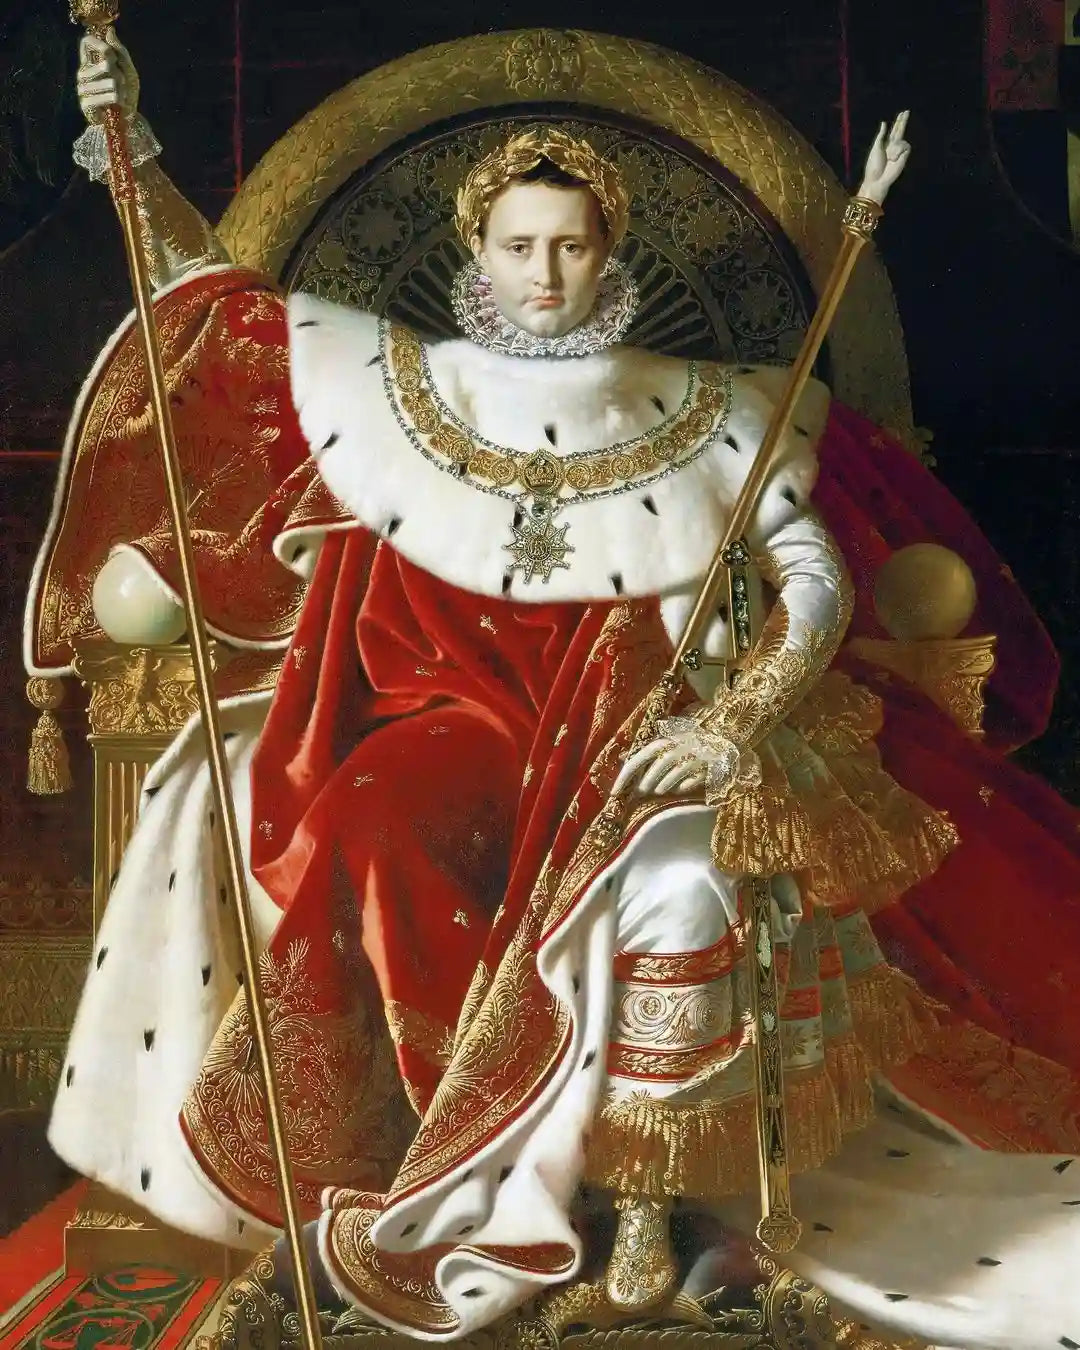 Napoleon on His Imperial Throne (1806) by Jean-Auguste-Dominique Ingres